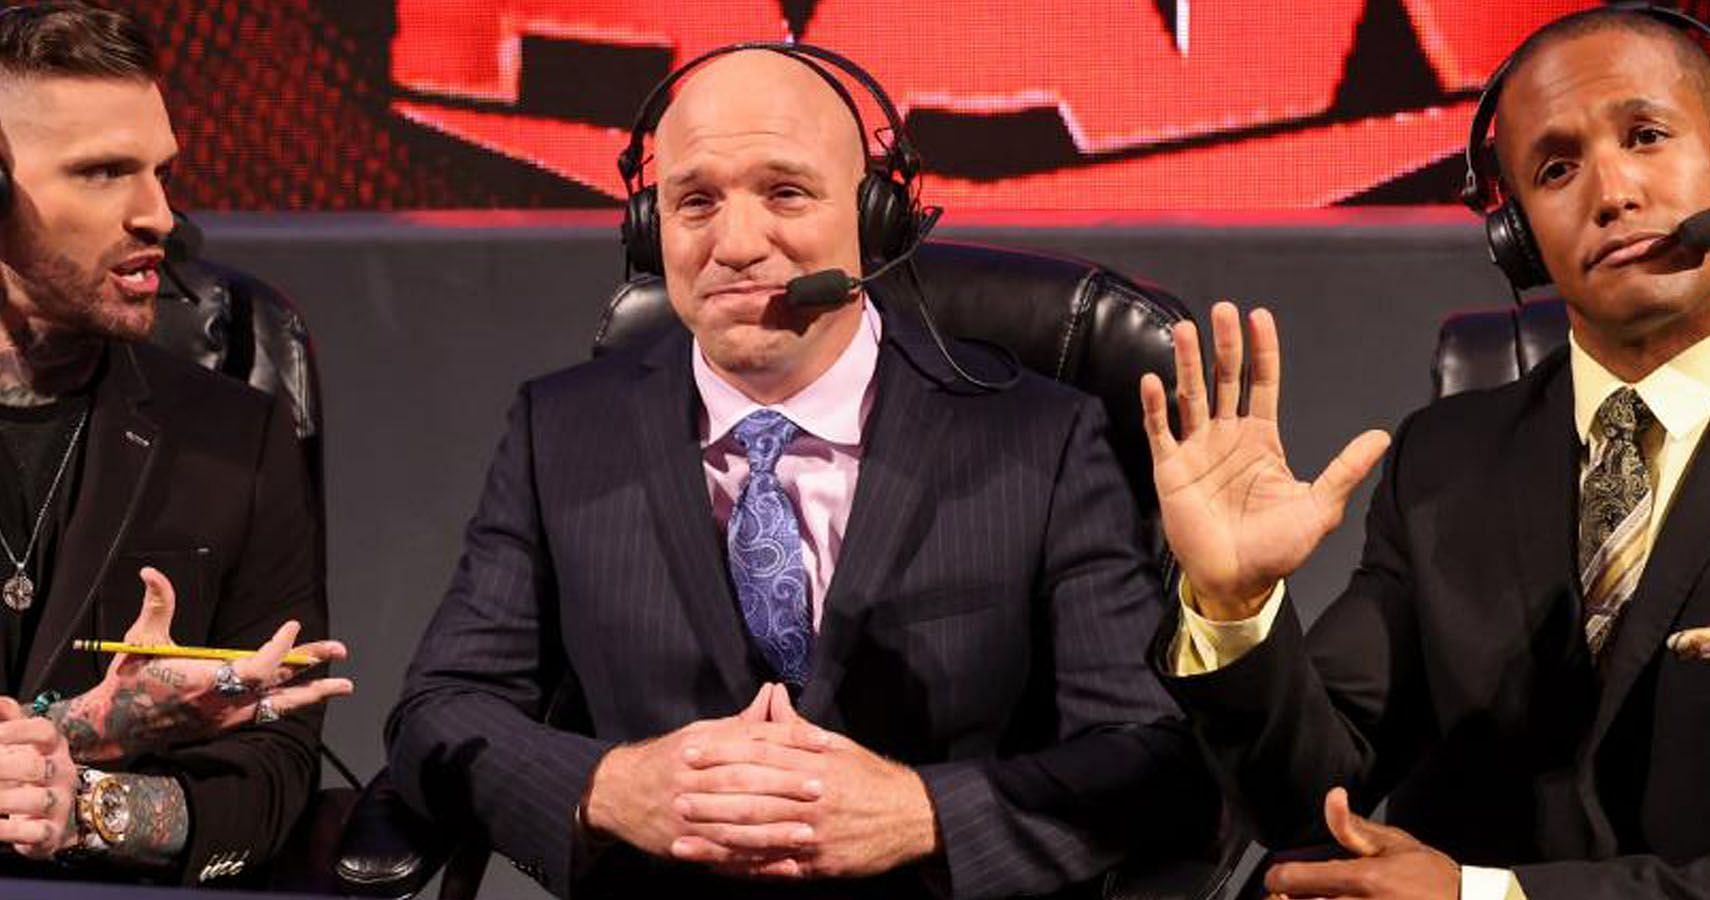 Jimmy Smith is a former UFC commentator